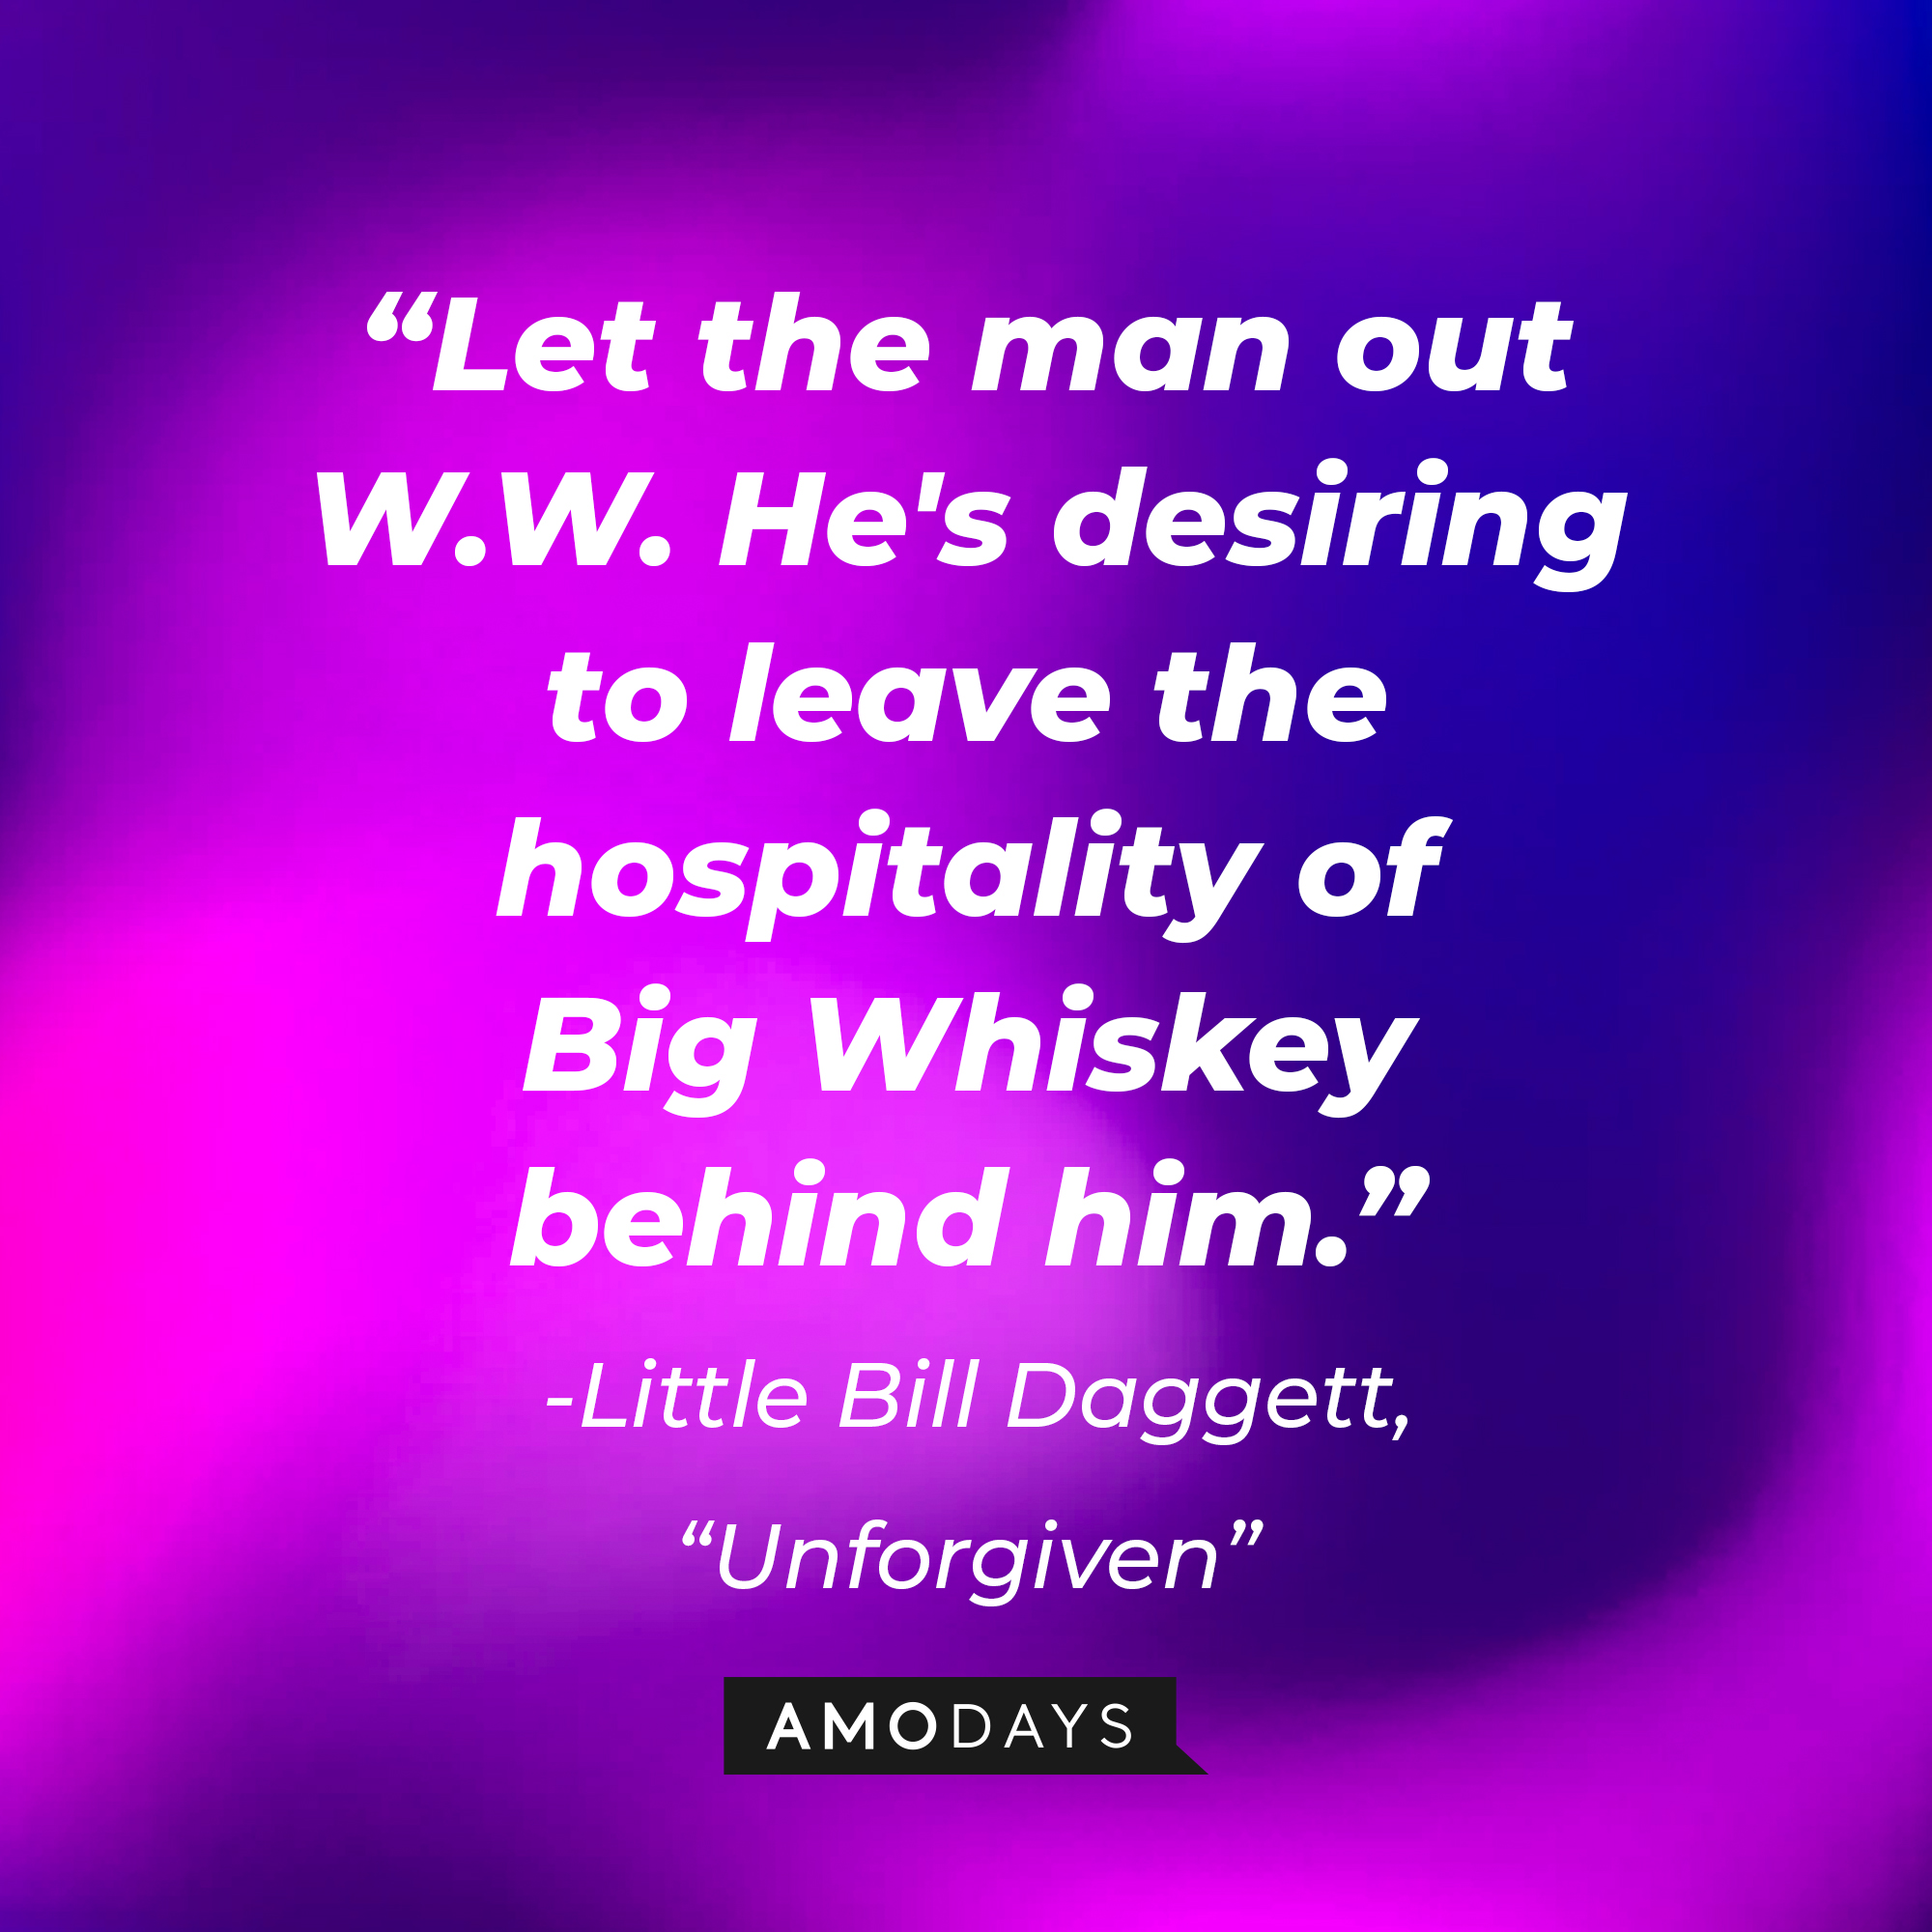 Little Bill Dagget's quote in "Unforgiven:" "Let the man out W.W. He's desiring to leave the hospitality of Big Whiskey behind him."  | Source: AmoDays